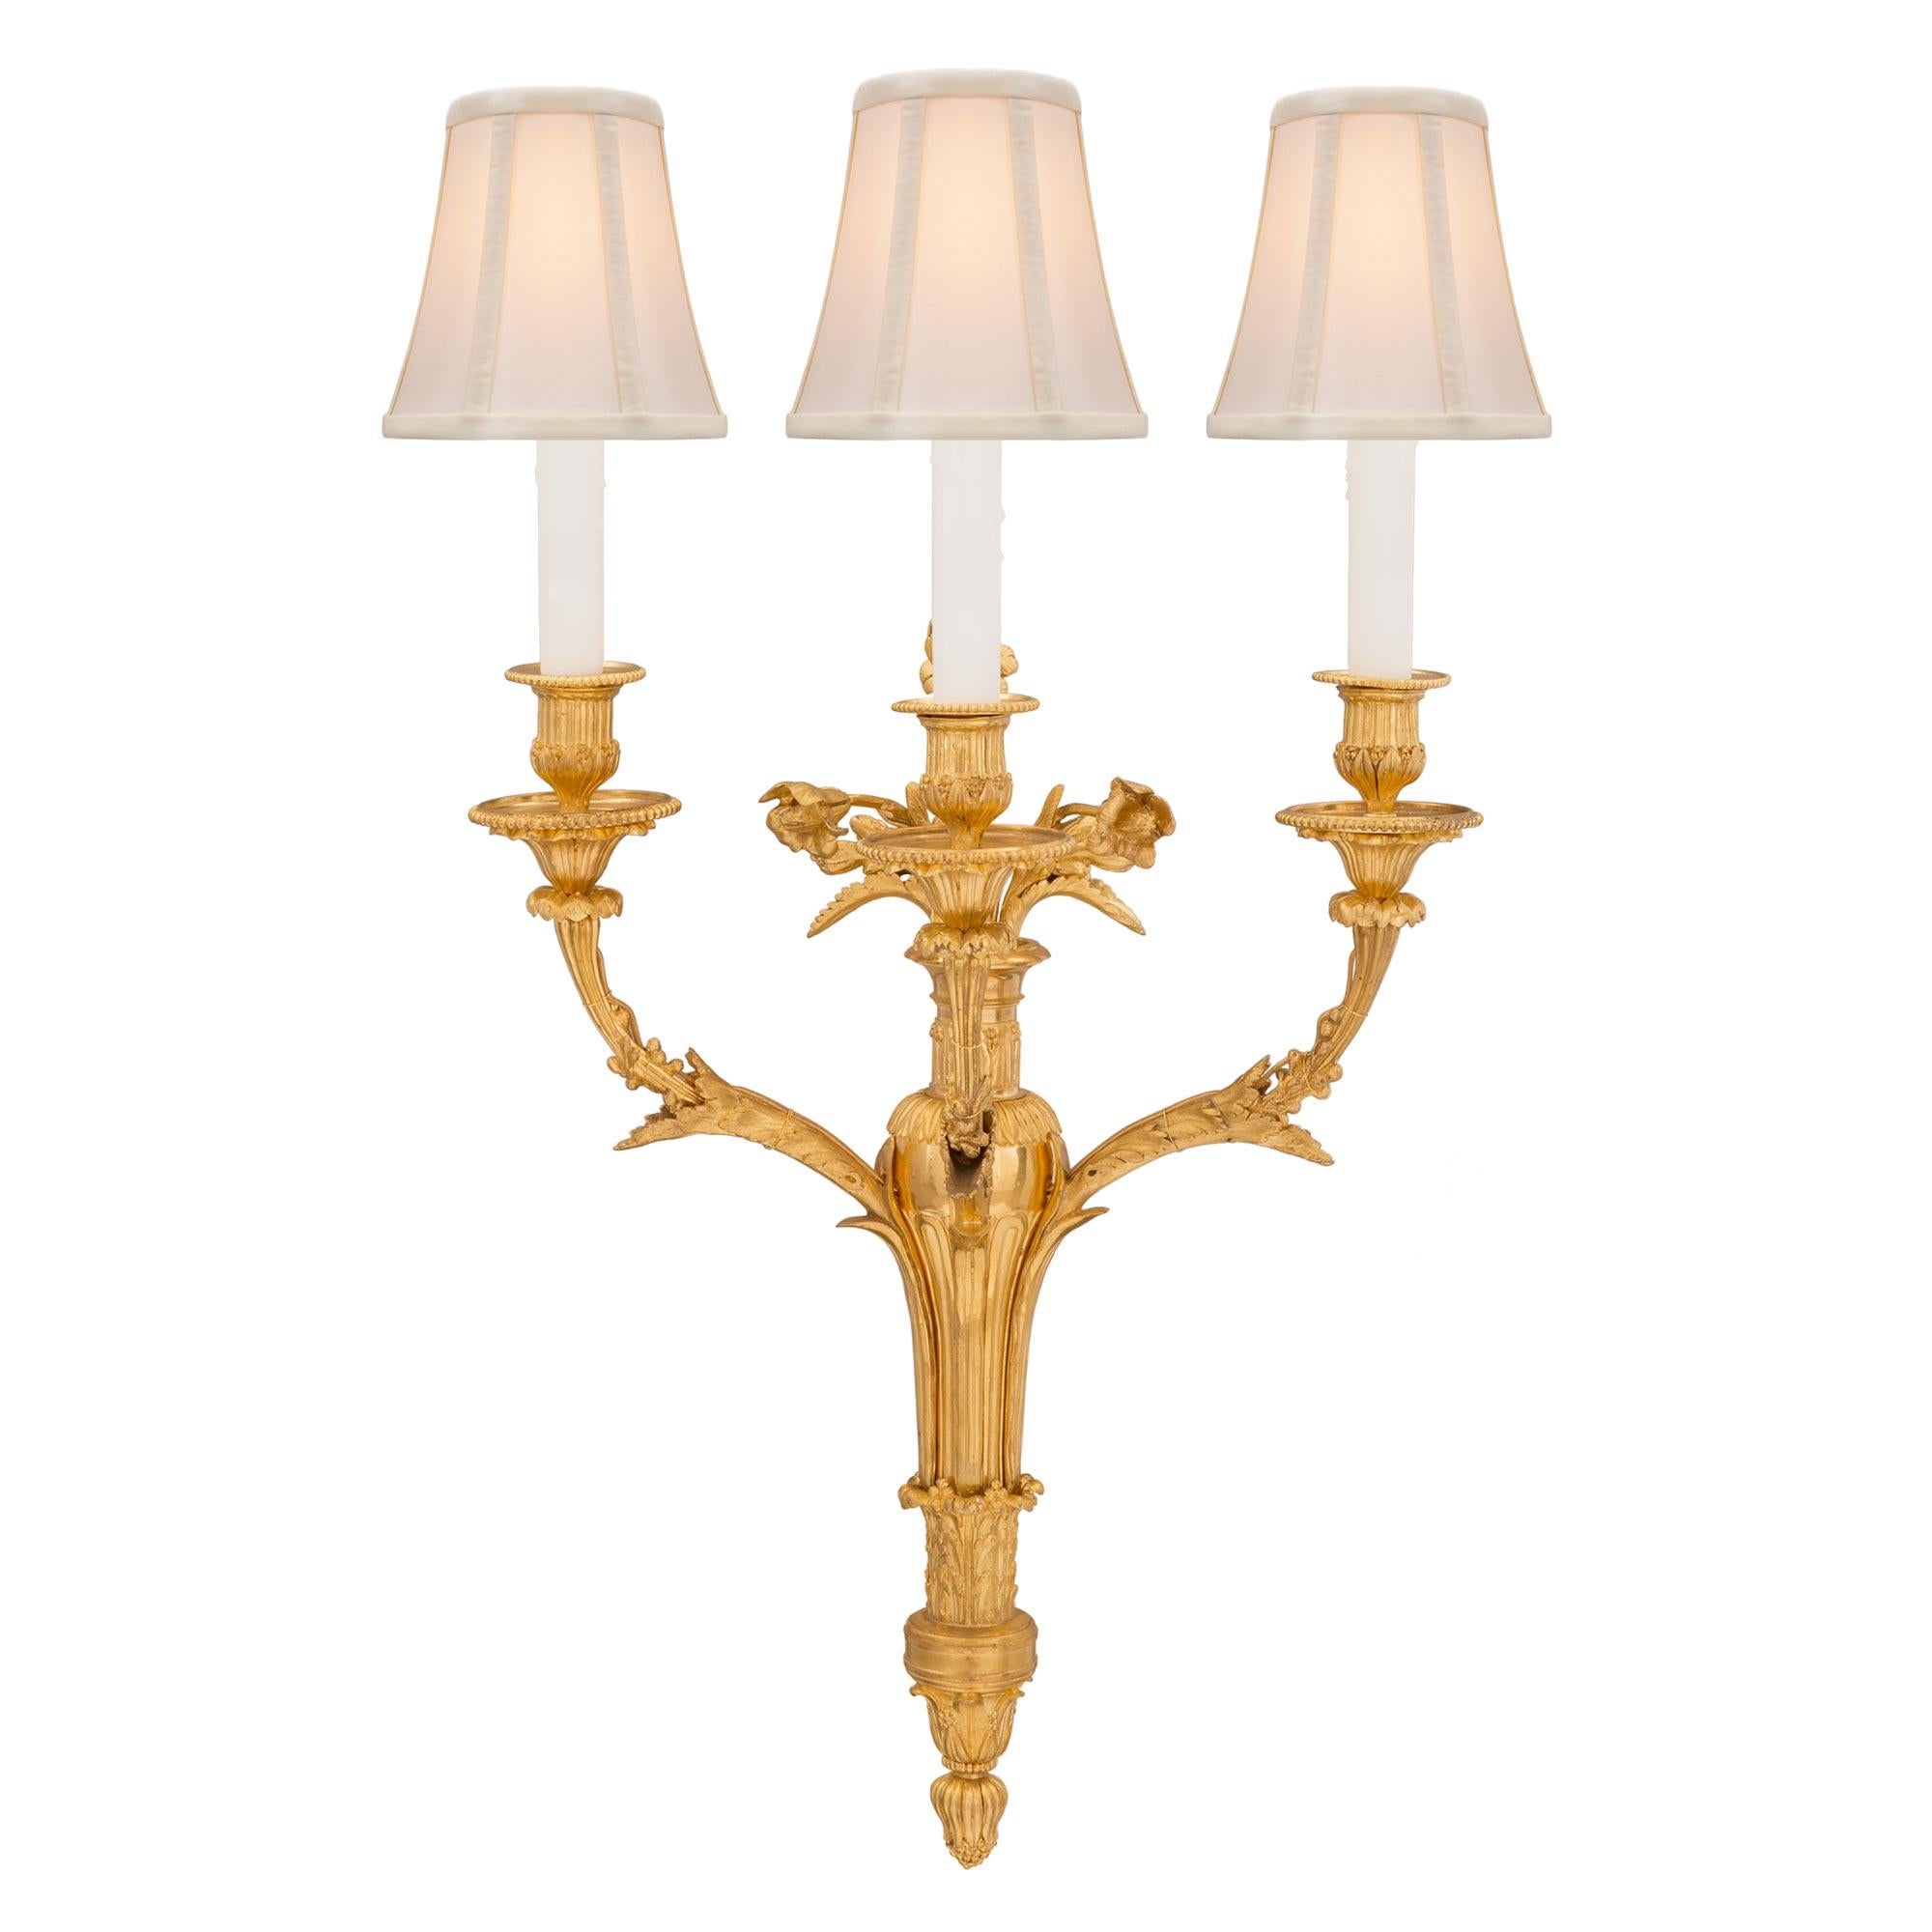 A stunning and extremely high quality complete set of six French 19th century Louis XVI St. ormolu sconces. Each three arm sconce is centered by a lovely bottom floral acorn finial below the elegant fluted lightly tapered central support adorned